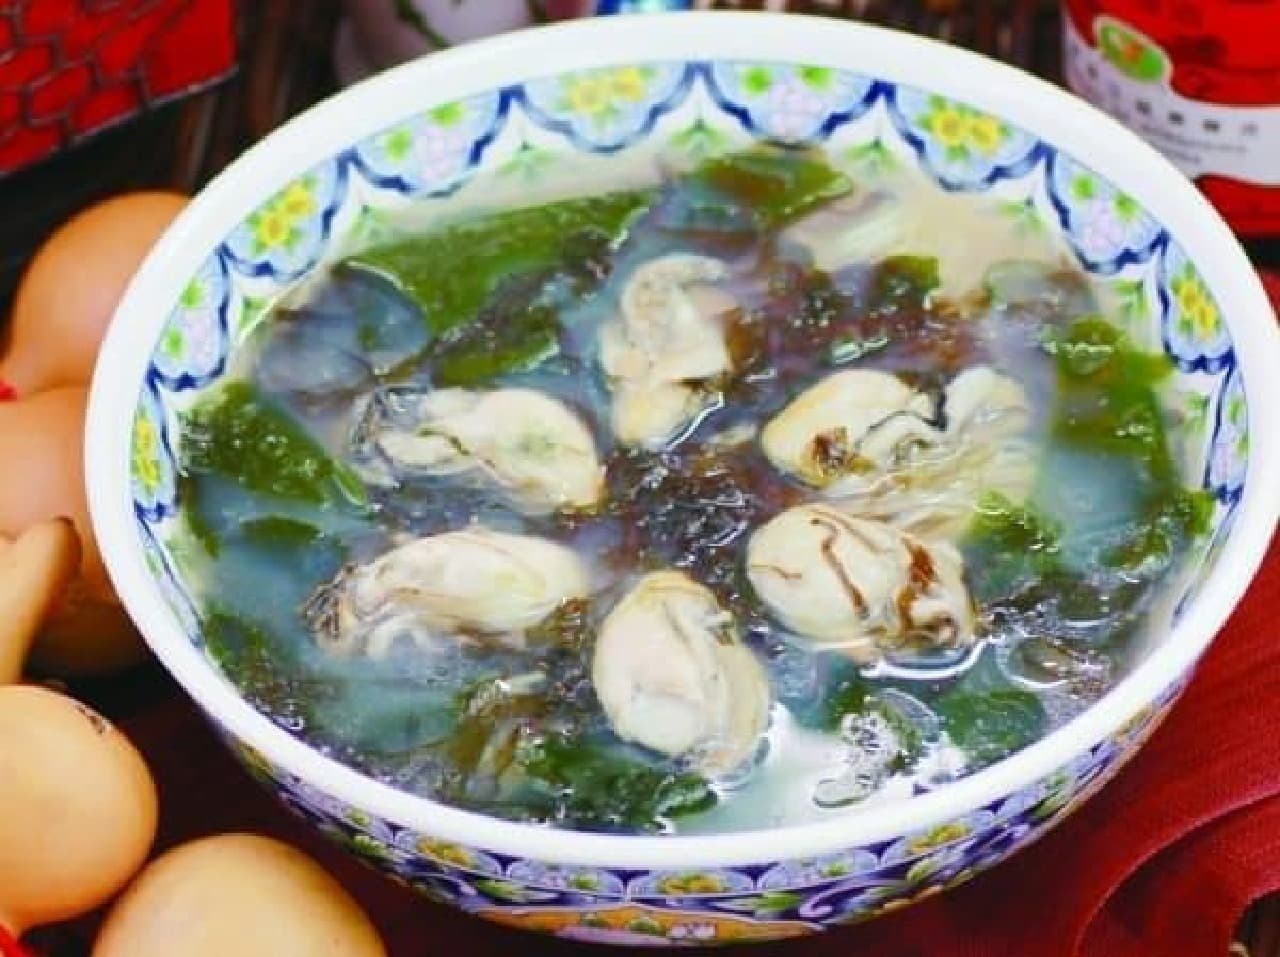 "Winter oyster ramen" where you can enjoy oysters